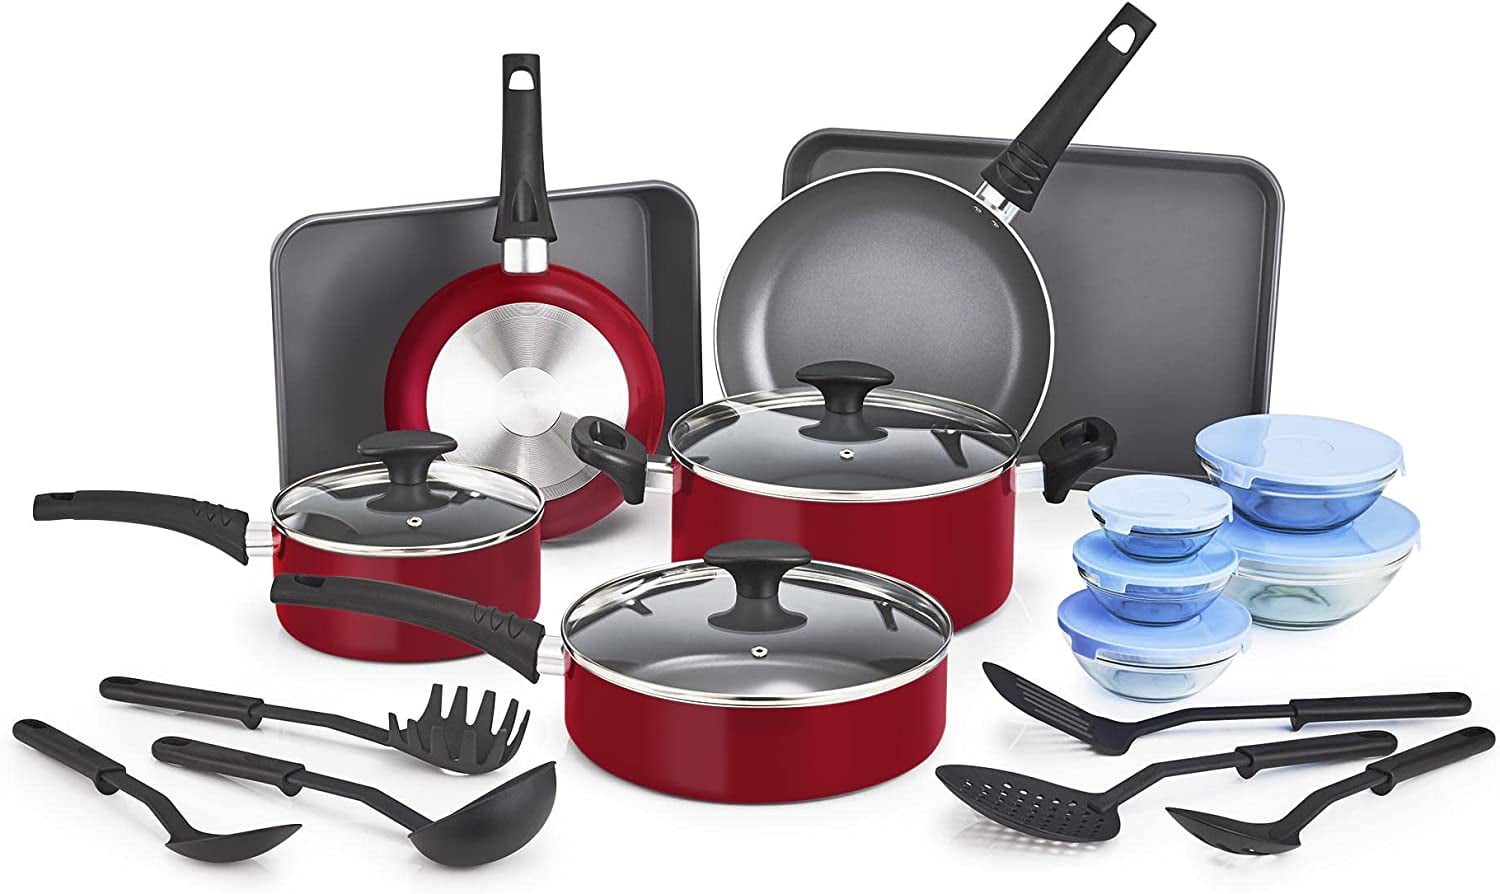 OSQI Nonstick Cookware Set with Glass Lids - Aluminum Bakeware, Pots and  Pans, Storage Bowls & Utensils, Compatible with All Stovetops, 21 Piece,  Red